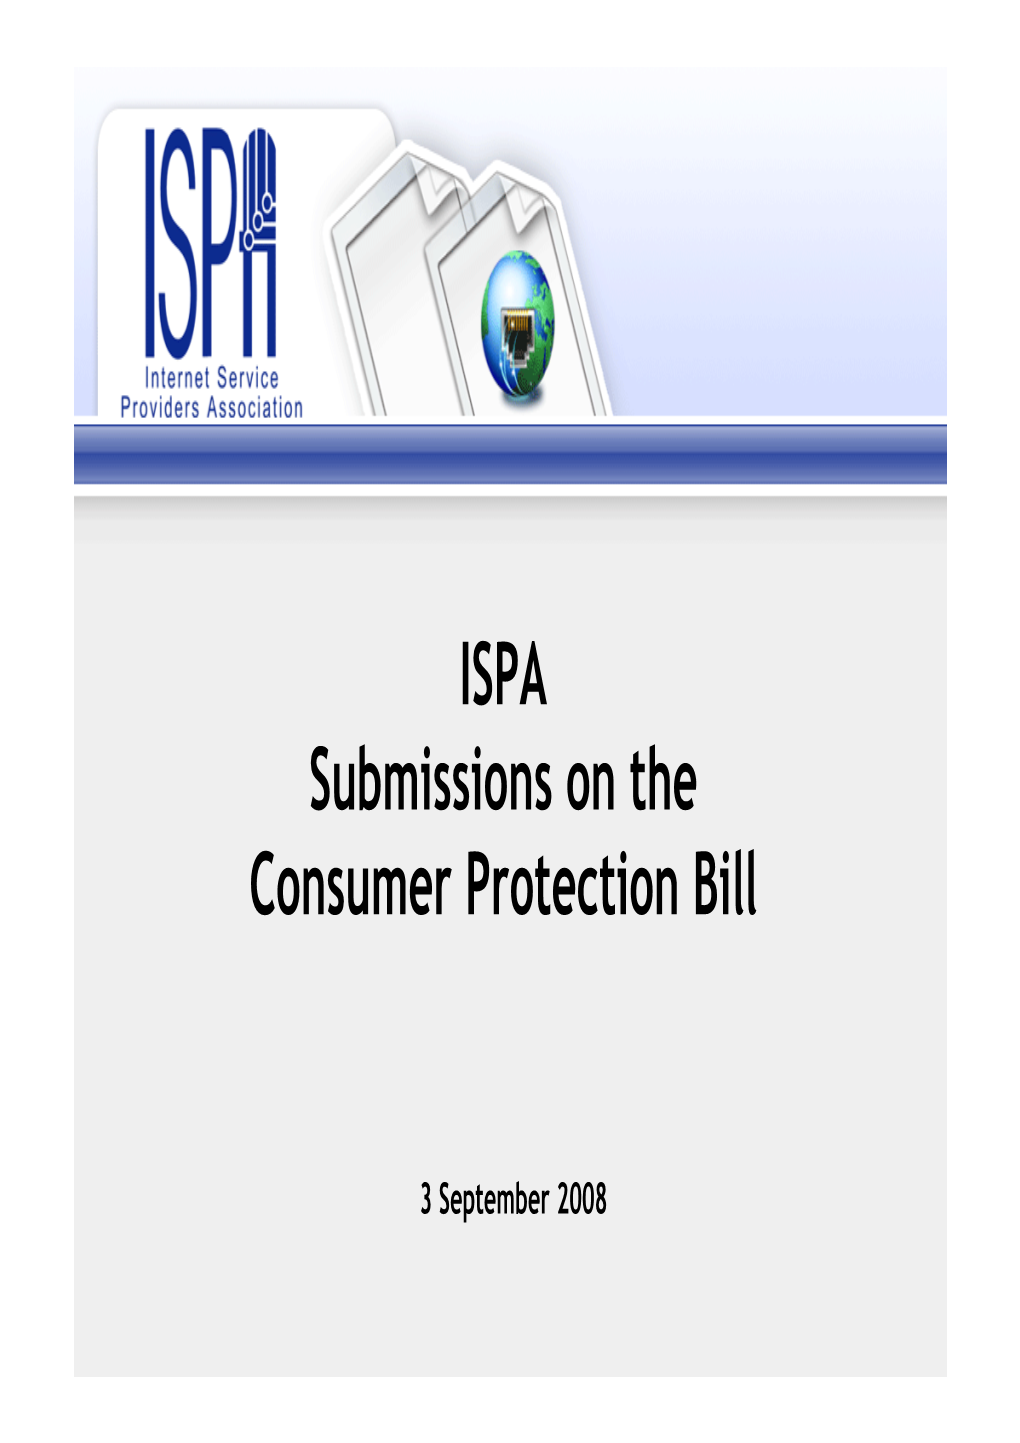 ISPA Submissions on the Consumer Protection Bill